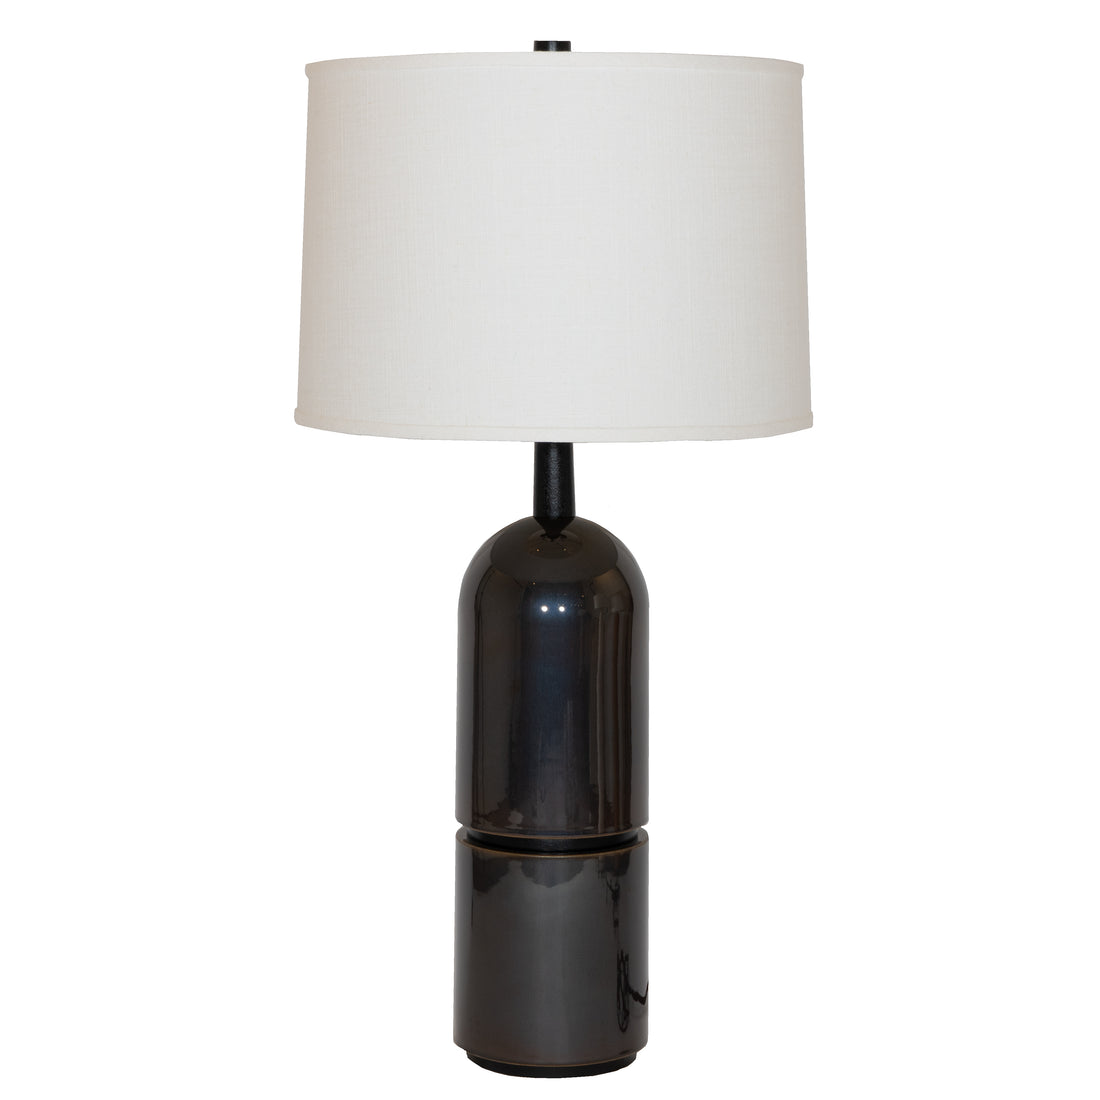 DOME II TABLE LAMP IN ANTHRACITE